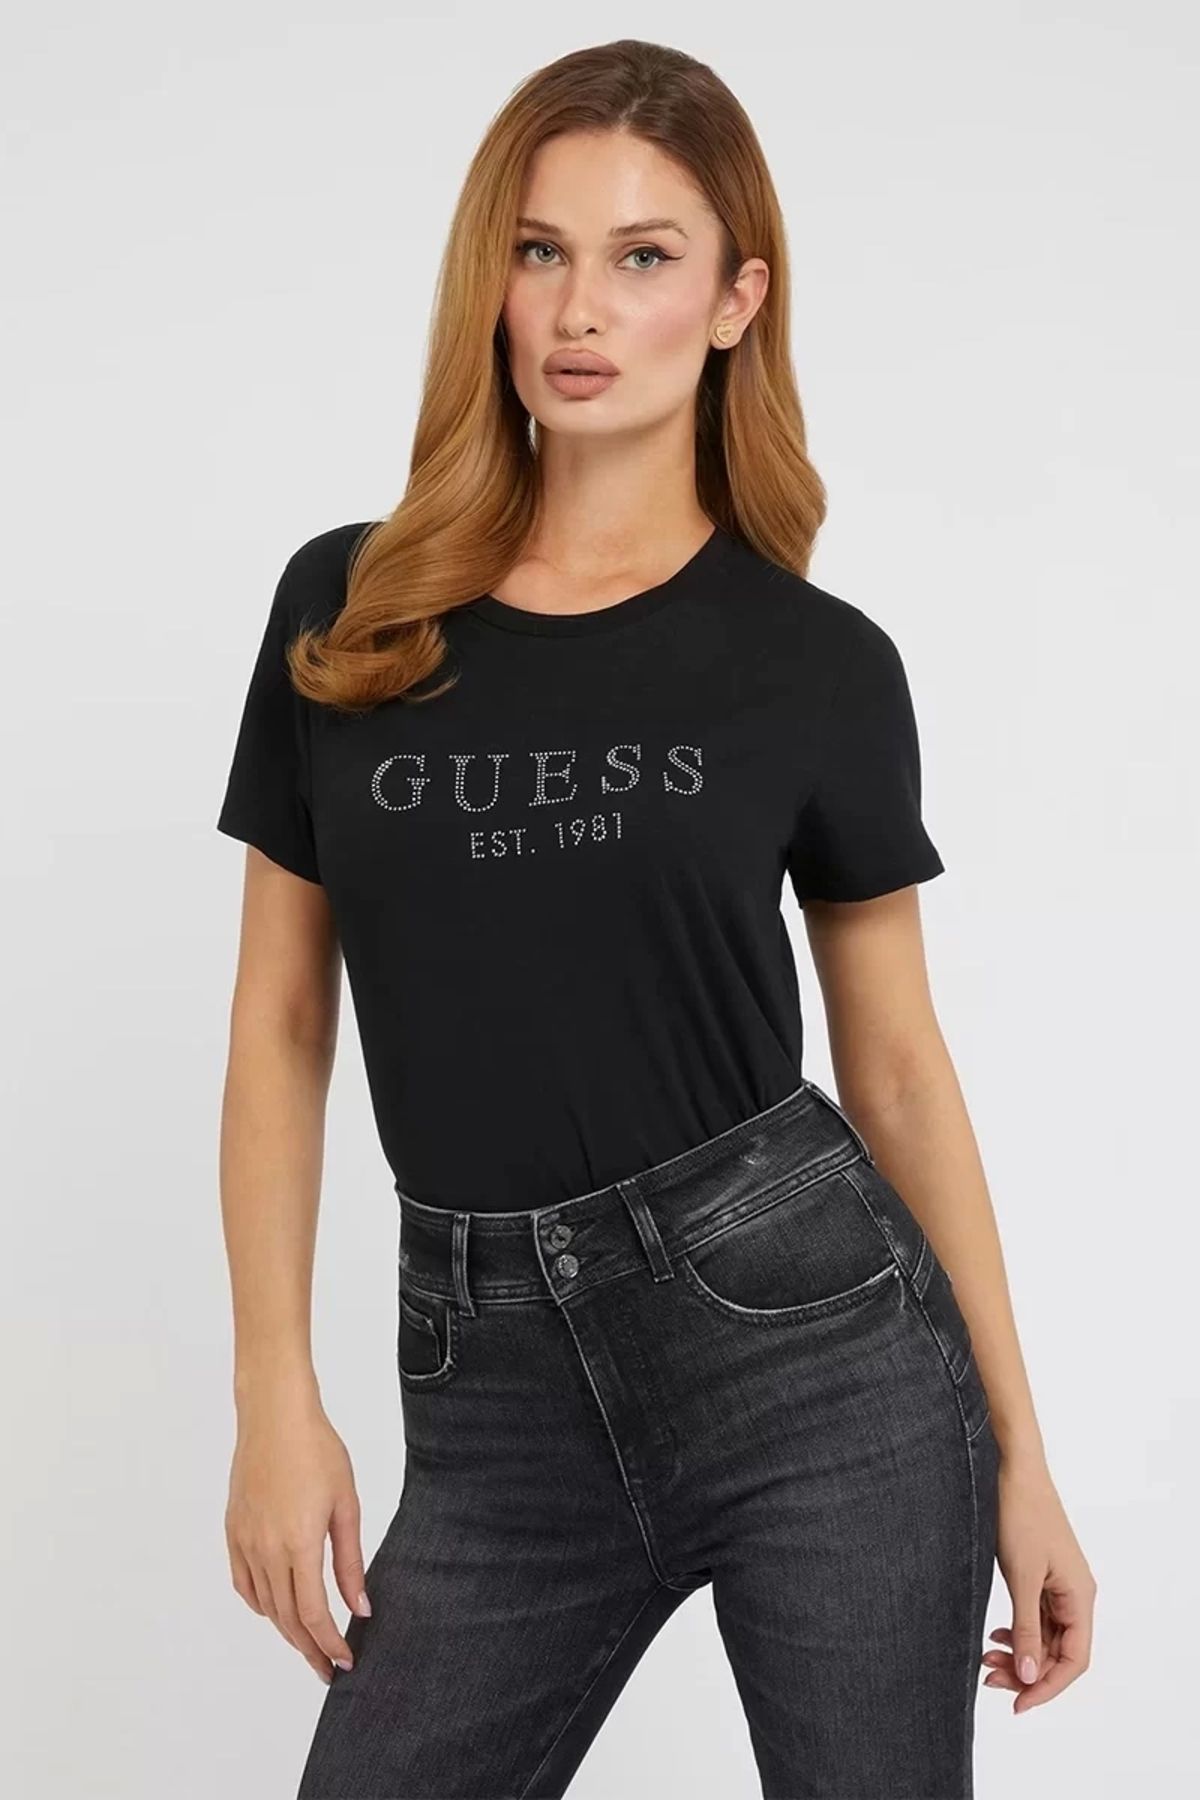 Guess SS GUESS 1981 CRYSTA